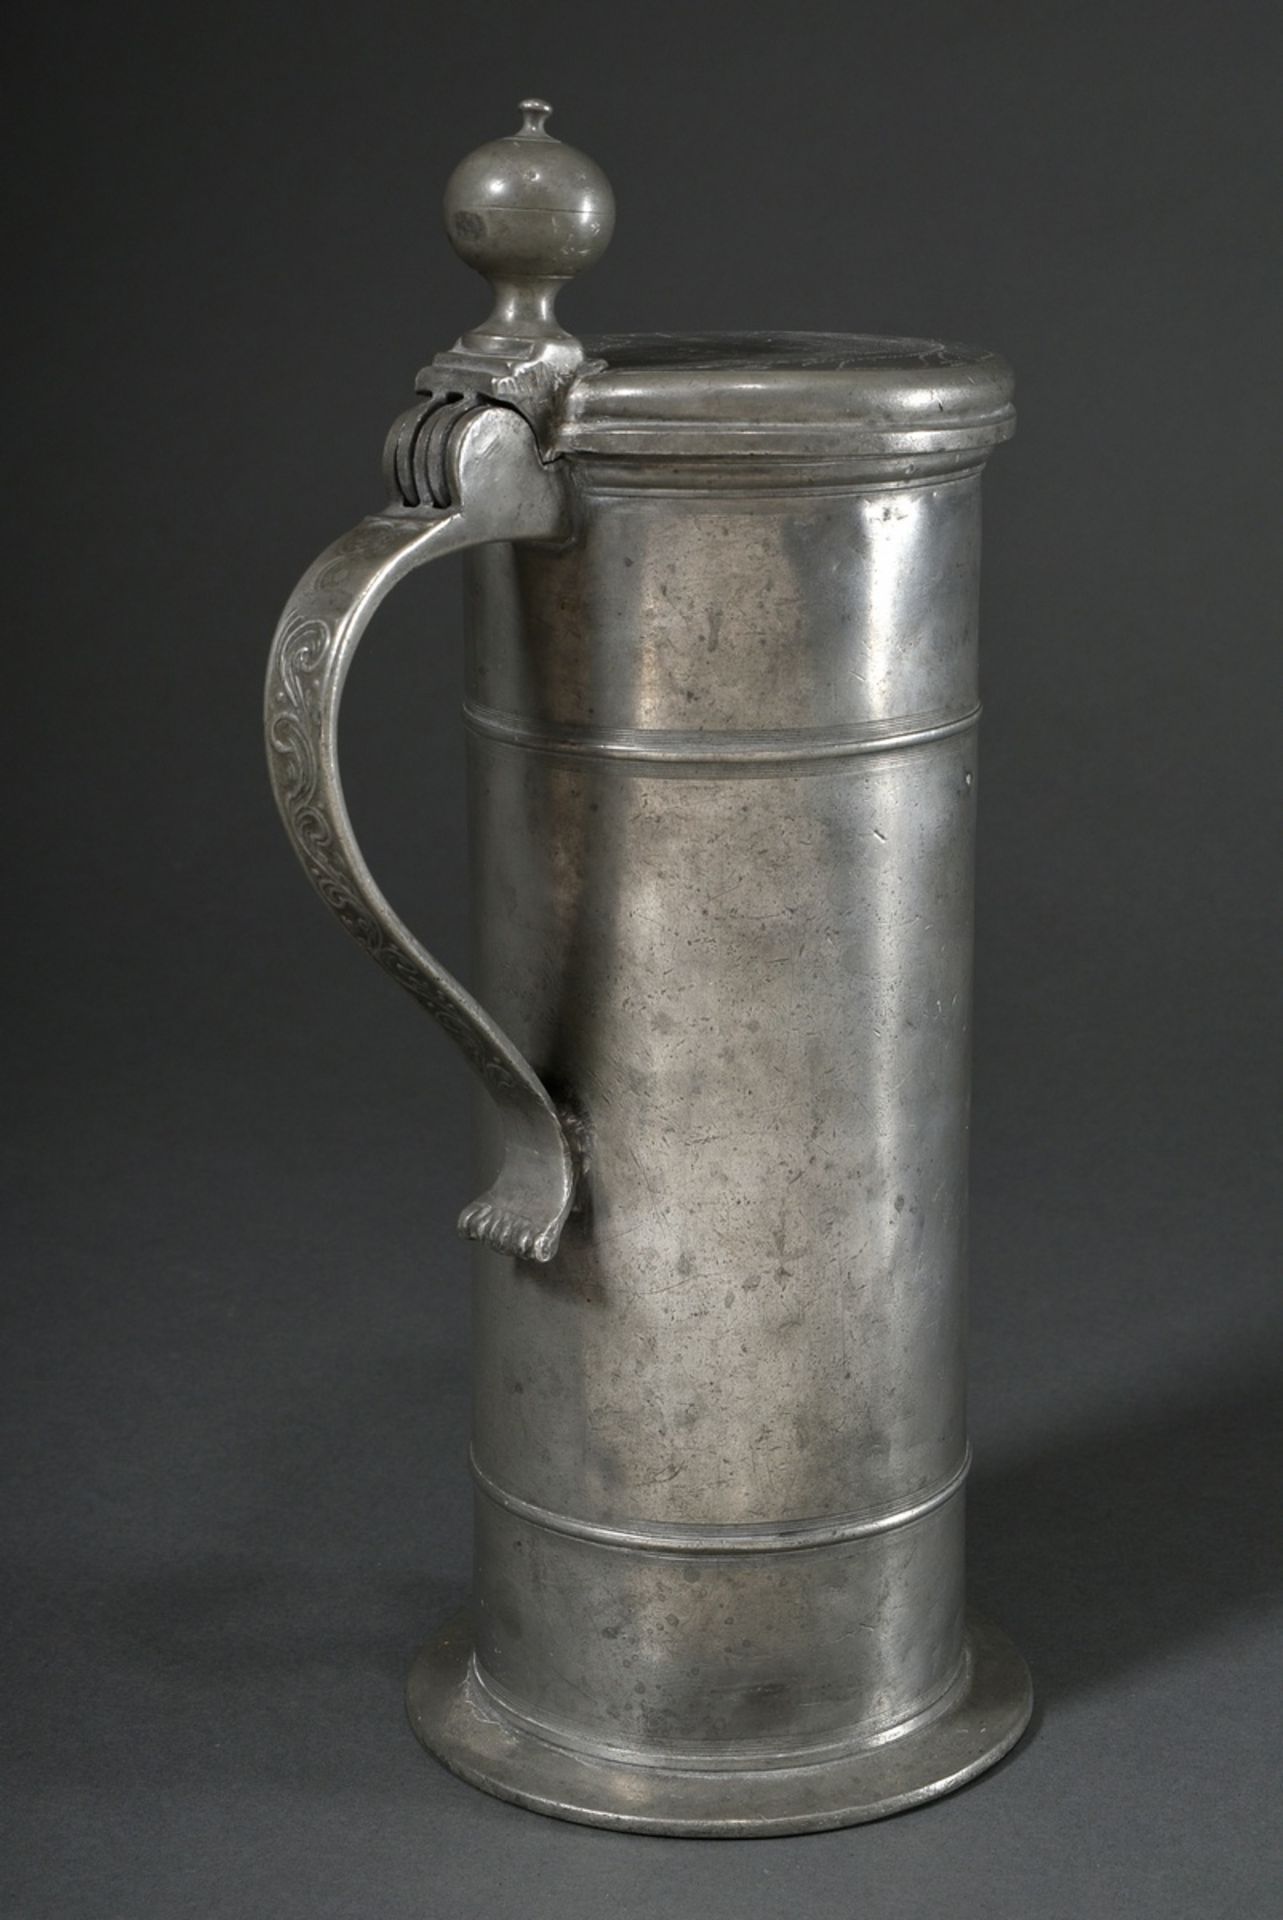 Tall pewter lidded tankard with floral engraved decoration and owner's inscription "Asmus Hinrich M - Image 2 of 8